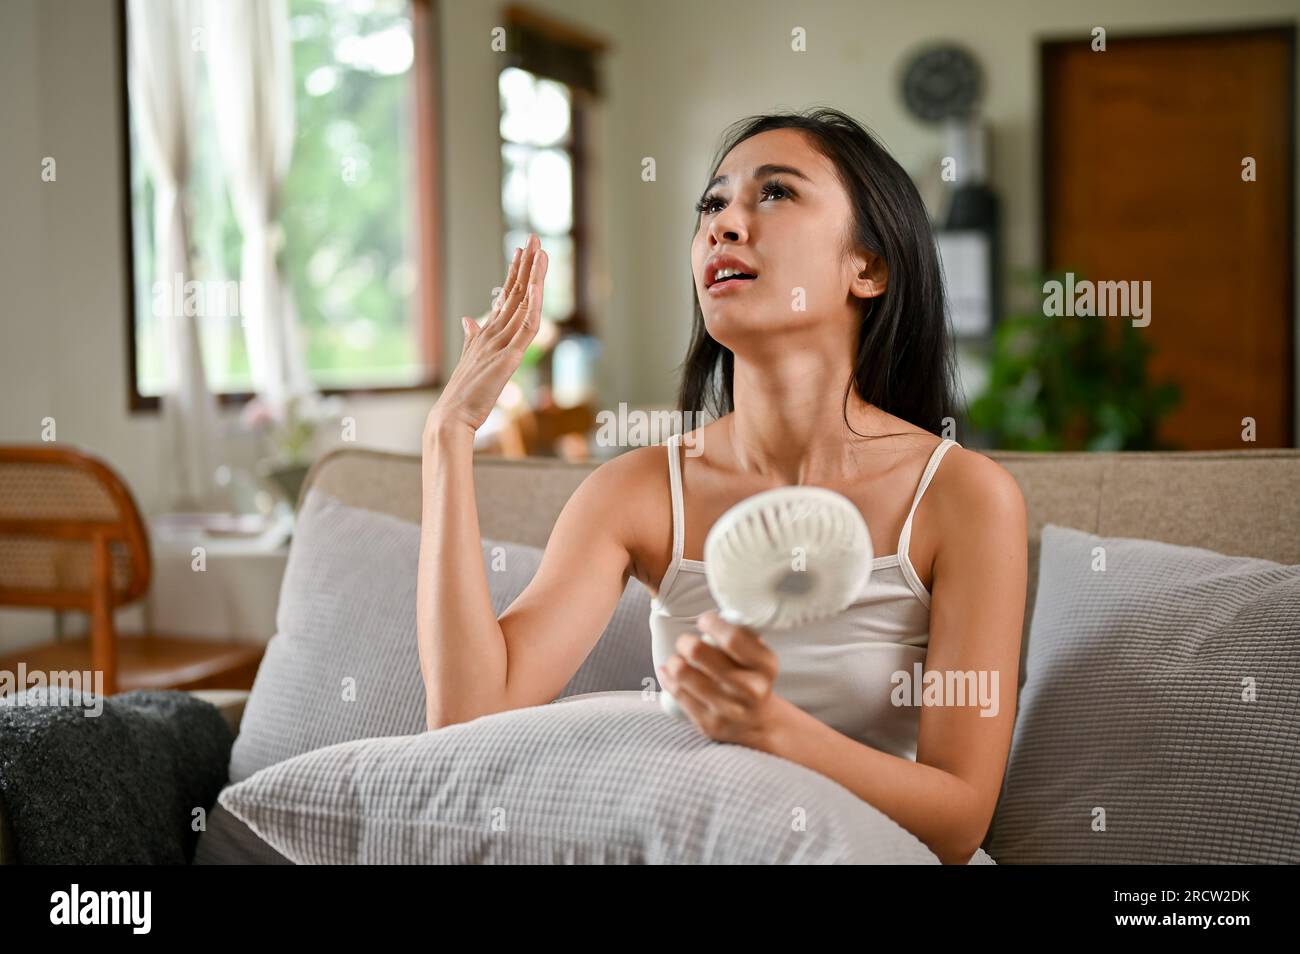 An overheated Asian woman suffering from a heat attack uses an electric handy fan to cool herself down while resting on a couch in her living room on Stock Photo